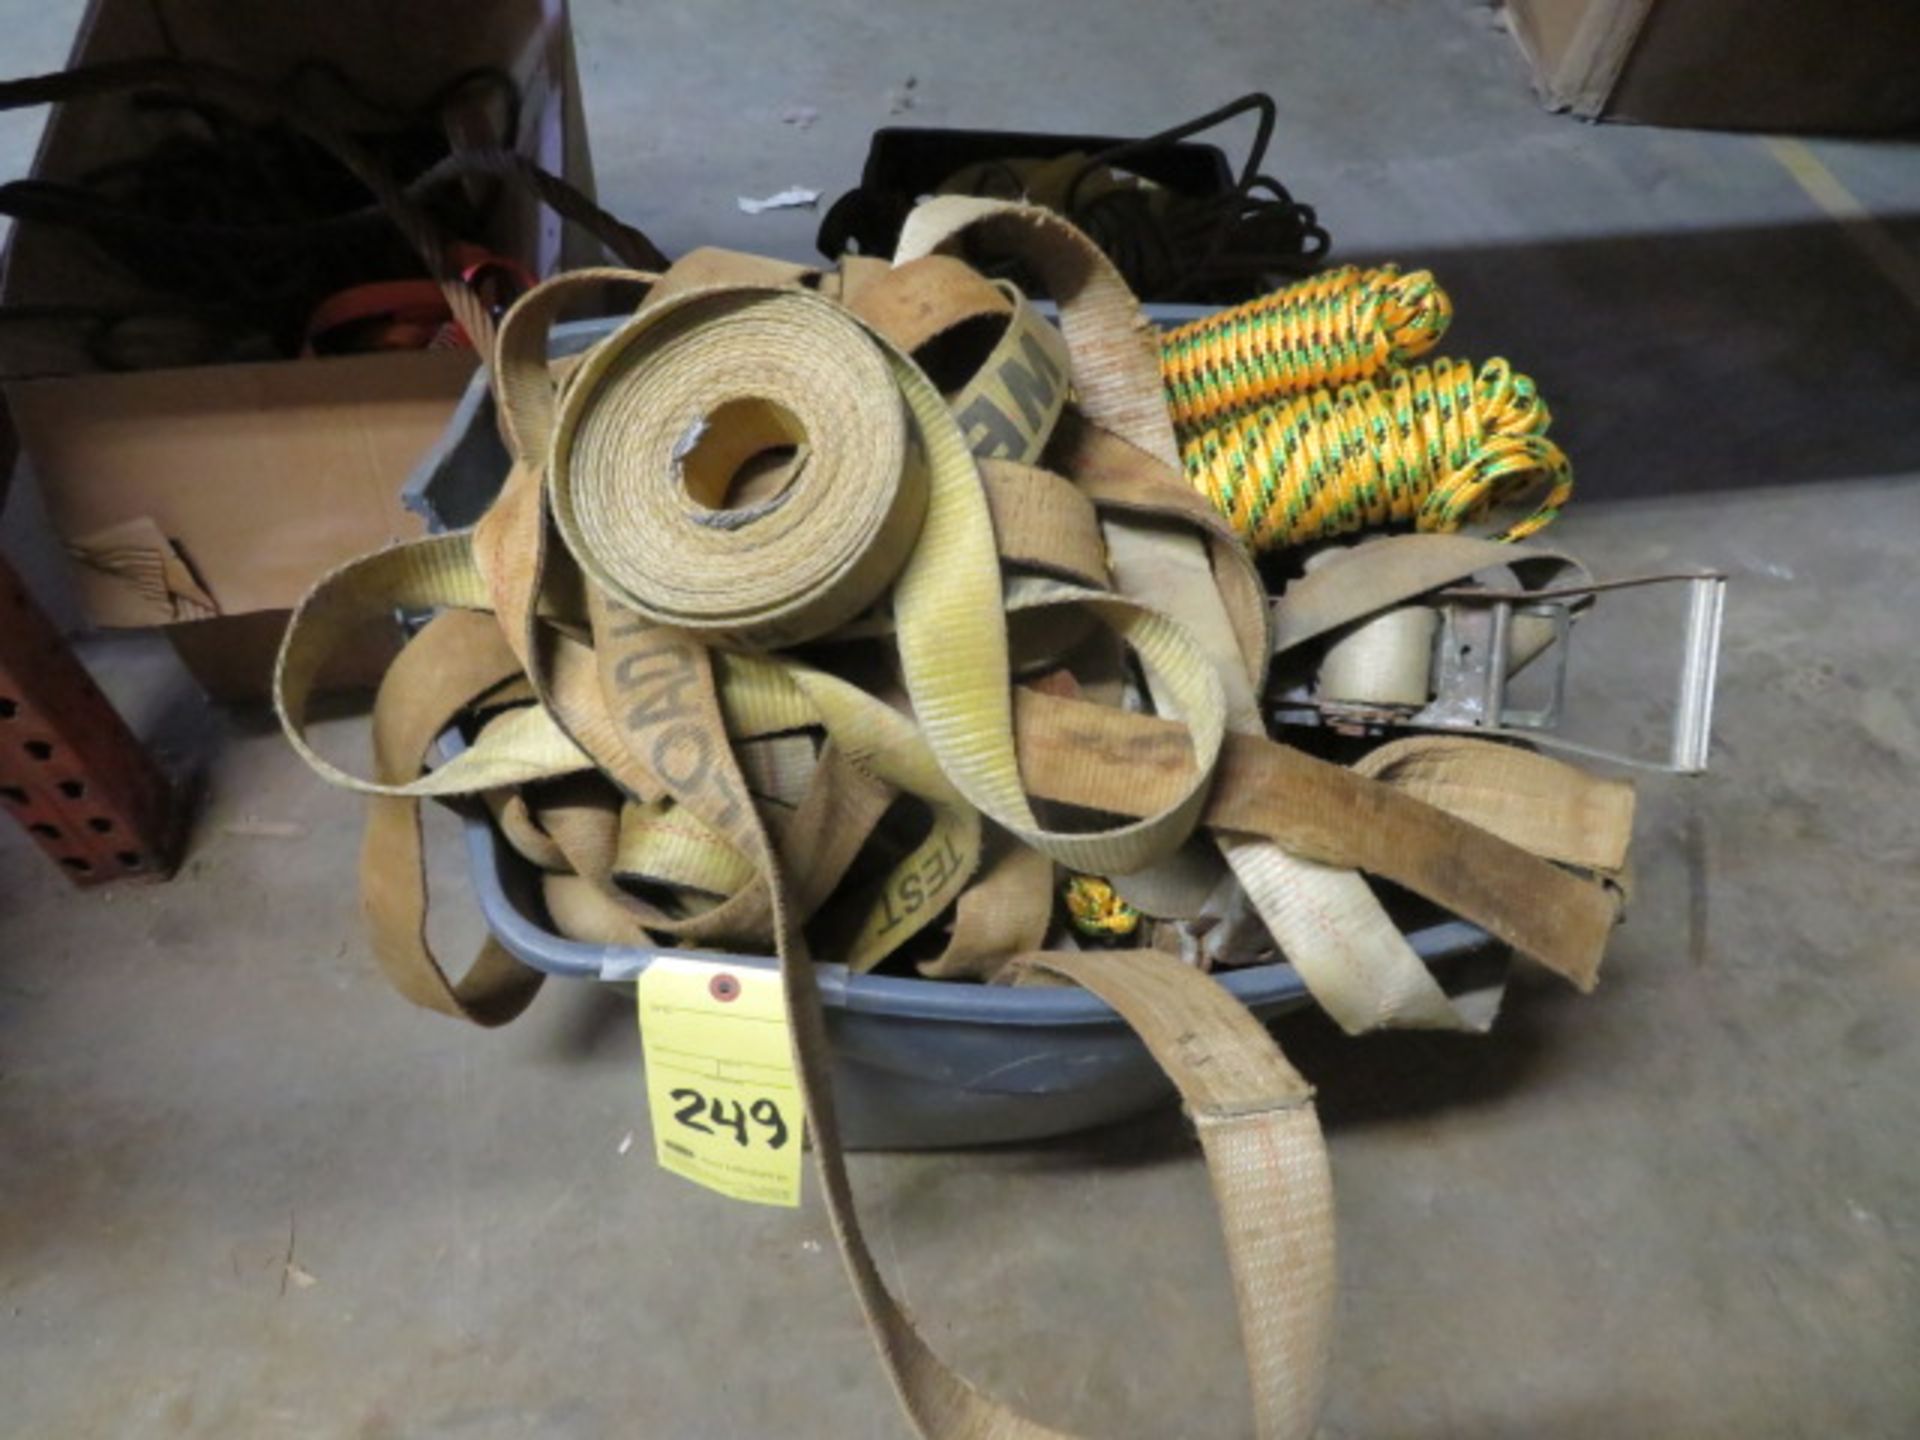 LOT CONSISTING OF: tie down nylon straps, rope, rachet straps, (three containers)